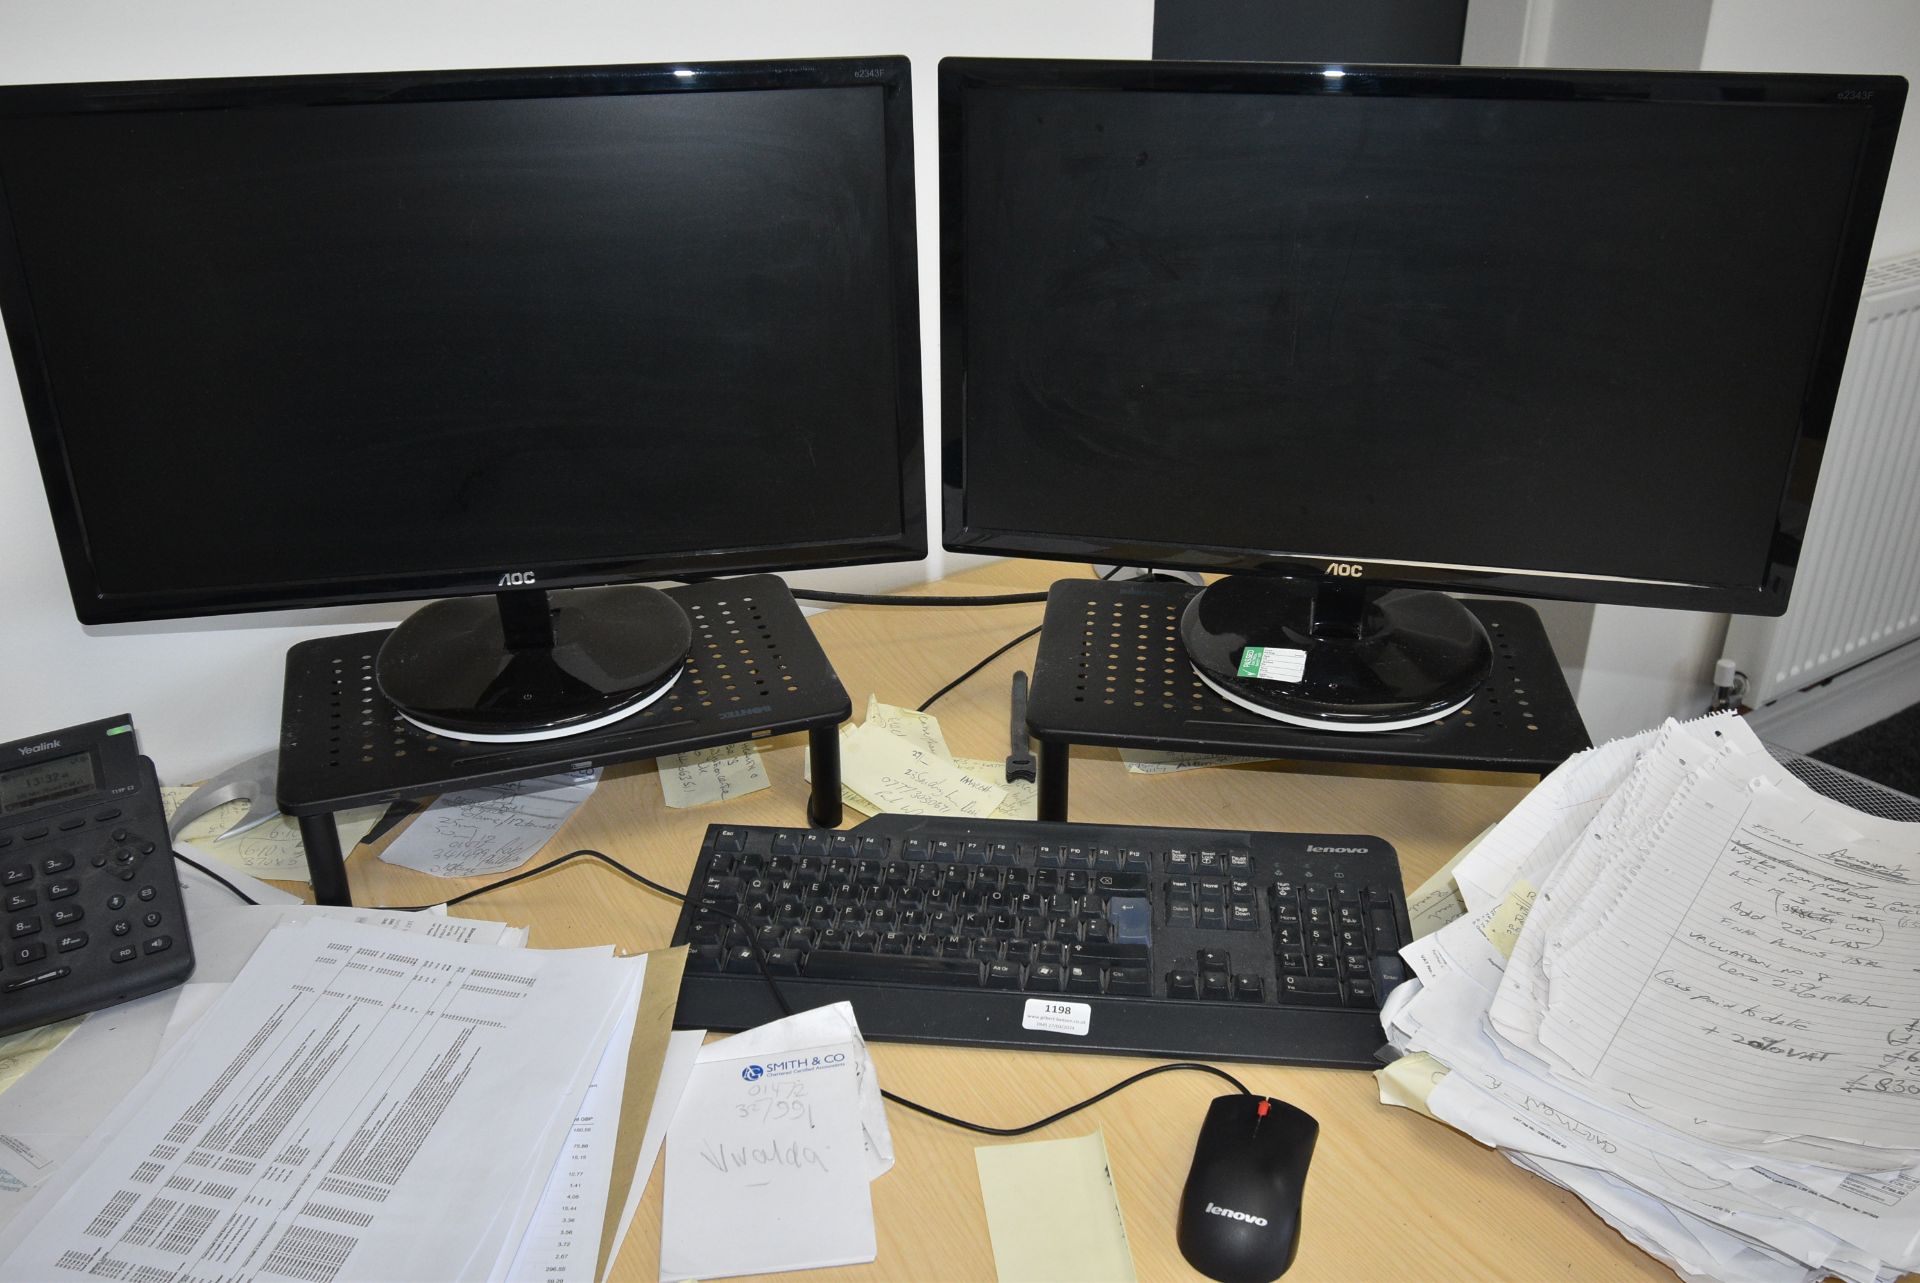 *Dell OptiPlex 7010 Desktop PC with Two AOC Monitors, Lenovo Keyboard & Mouse (Location: 64 King